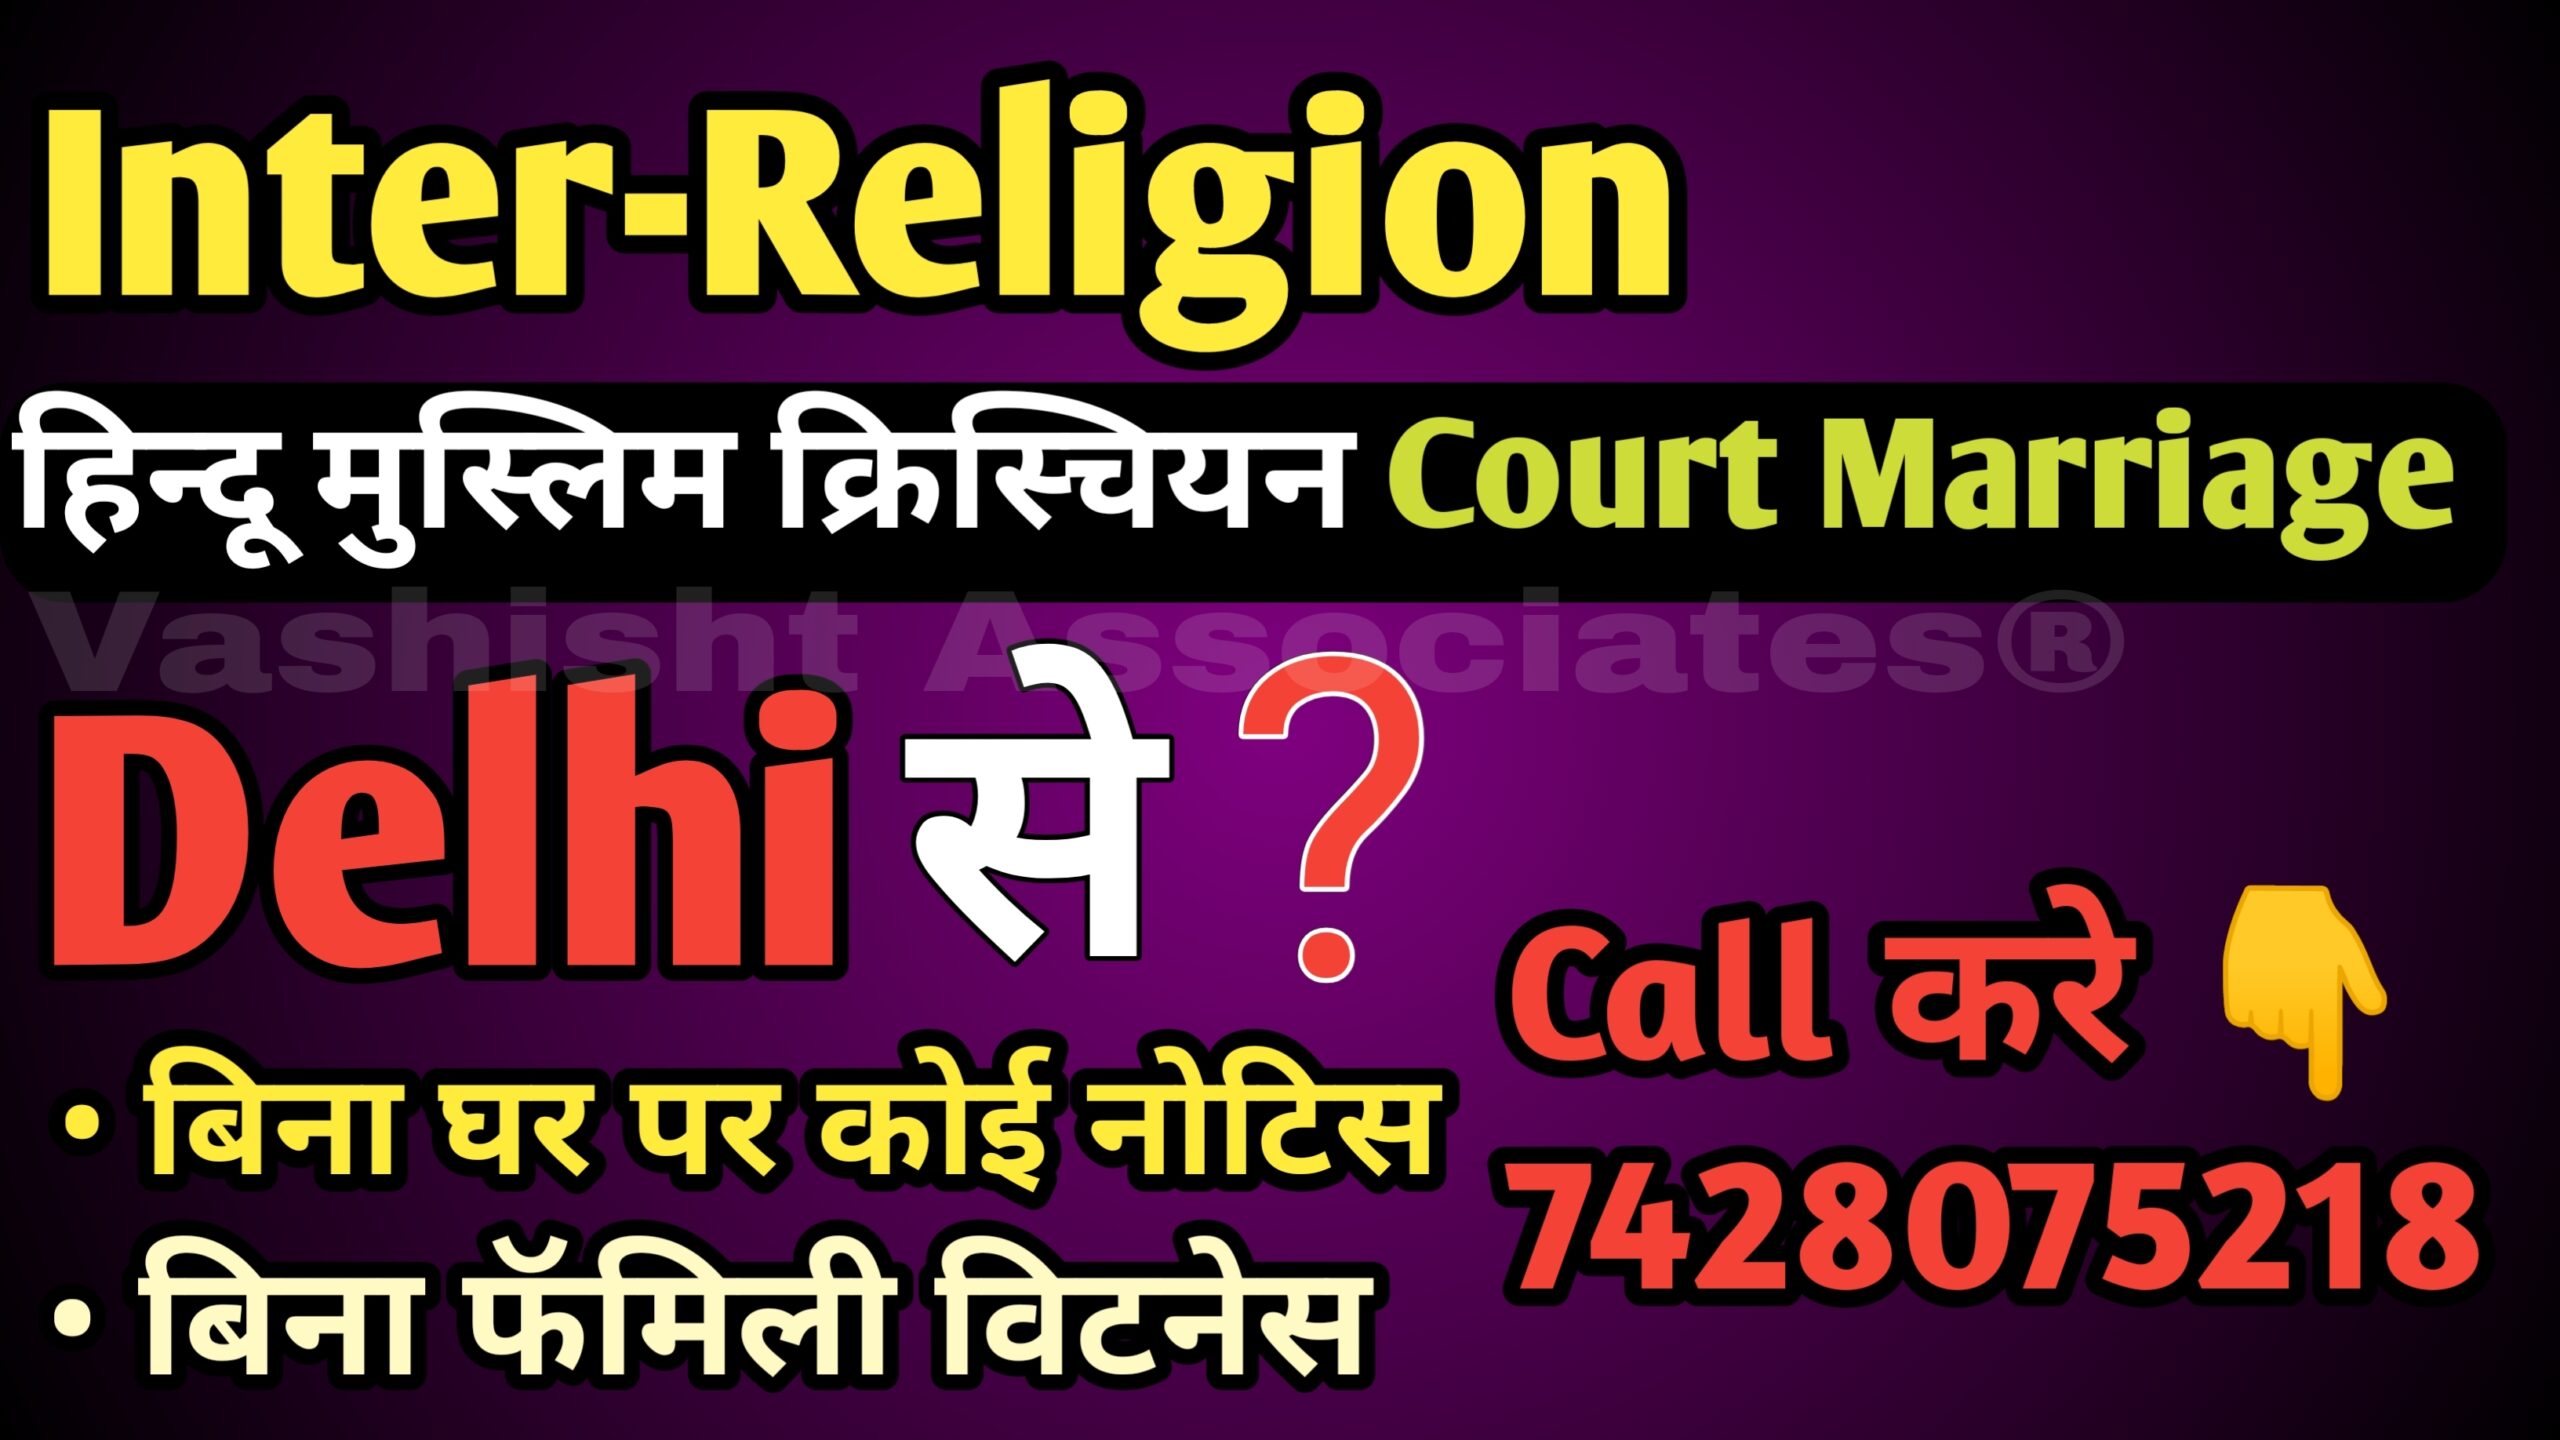 Inter Religion Court Marriage in Delhi NCR Ghaziabad